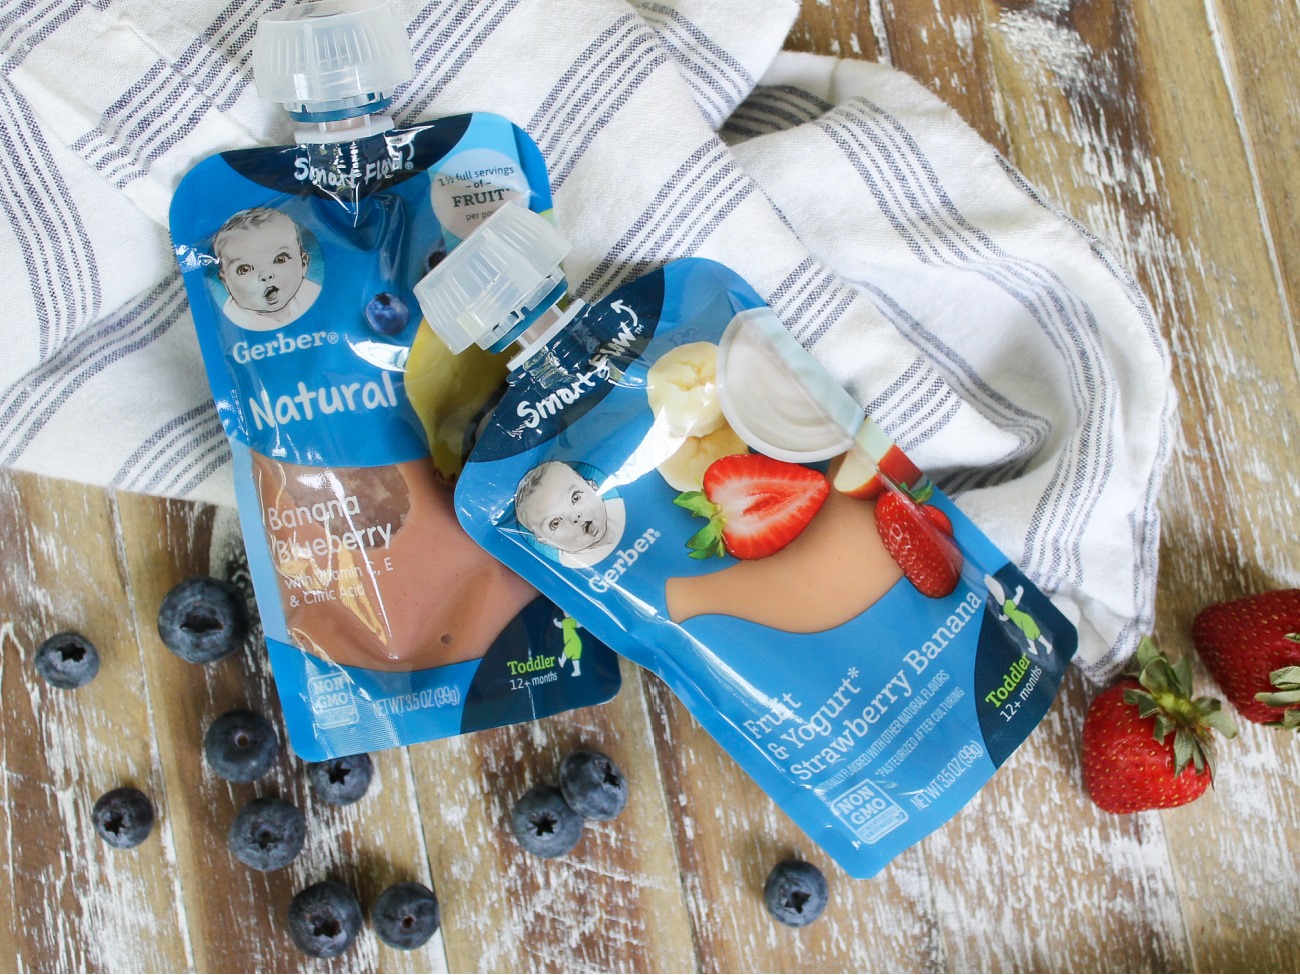 Gerber Baby Food As Low As 99¢ Per Pouch At Kroger